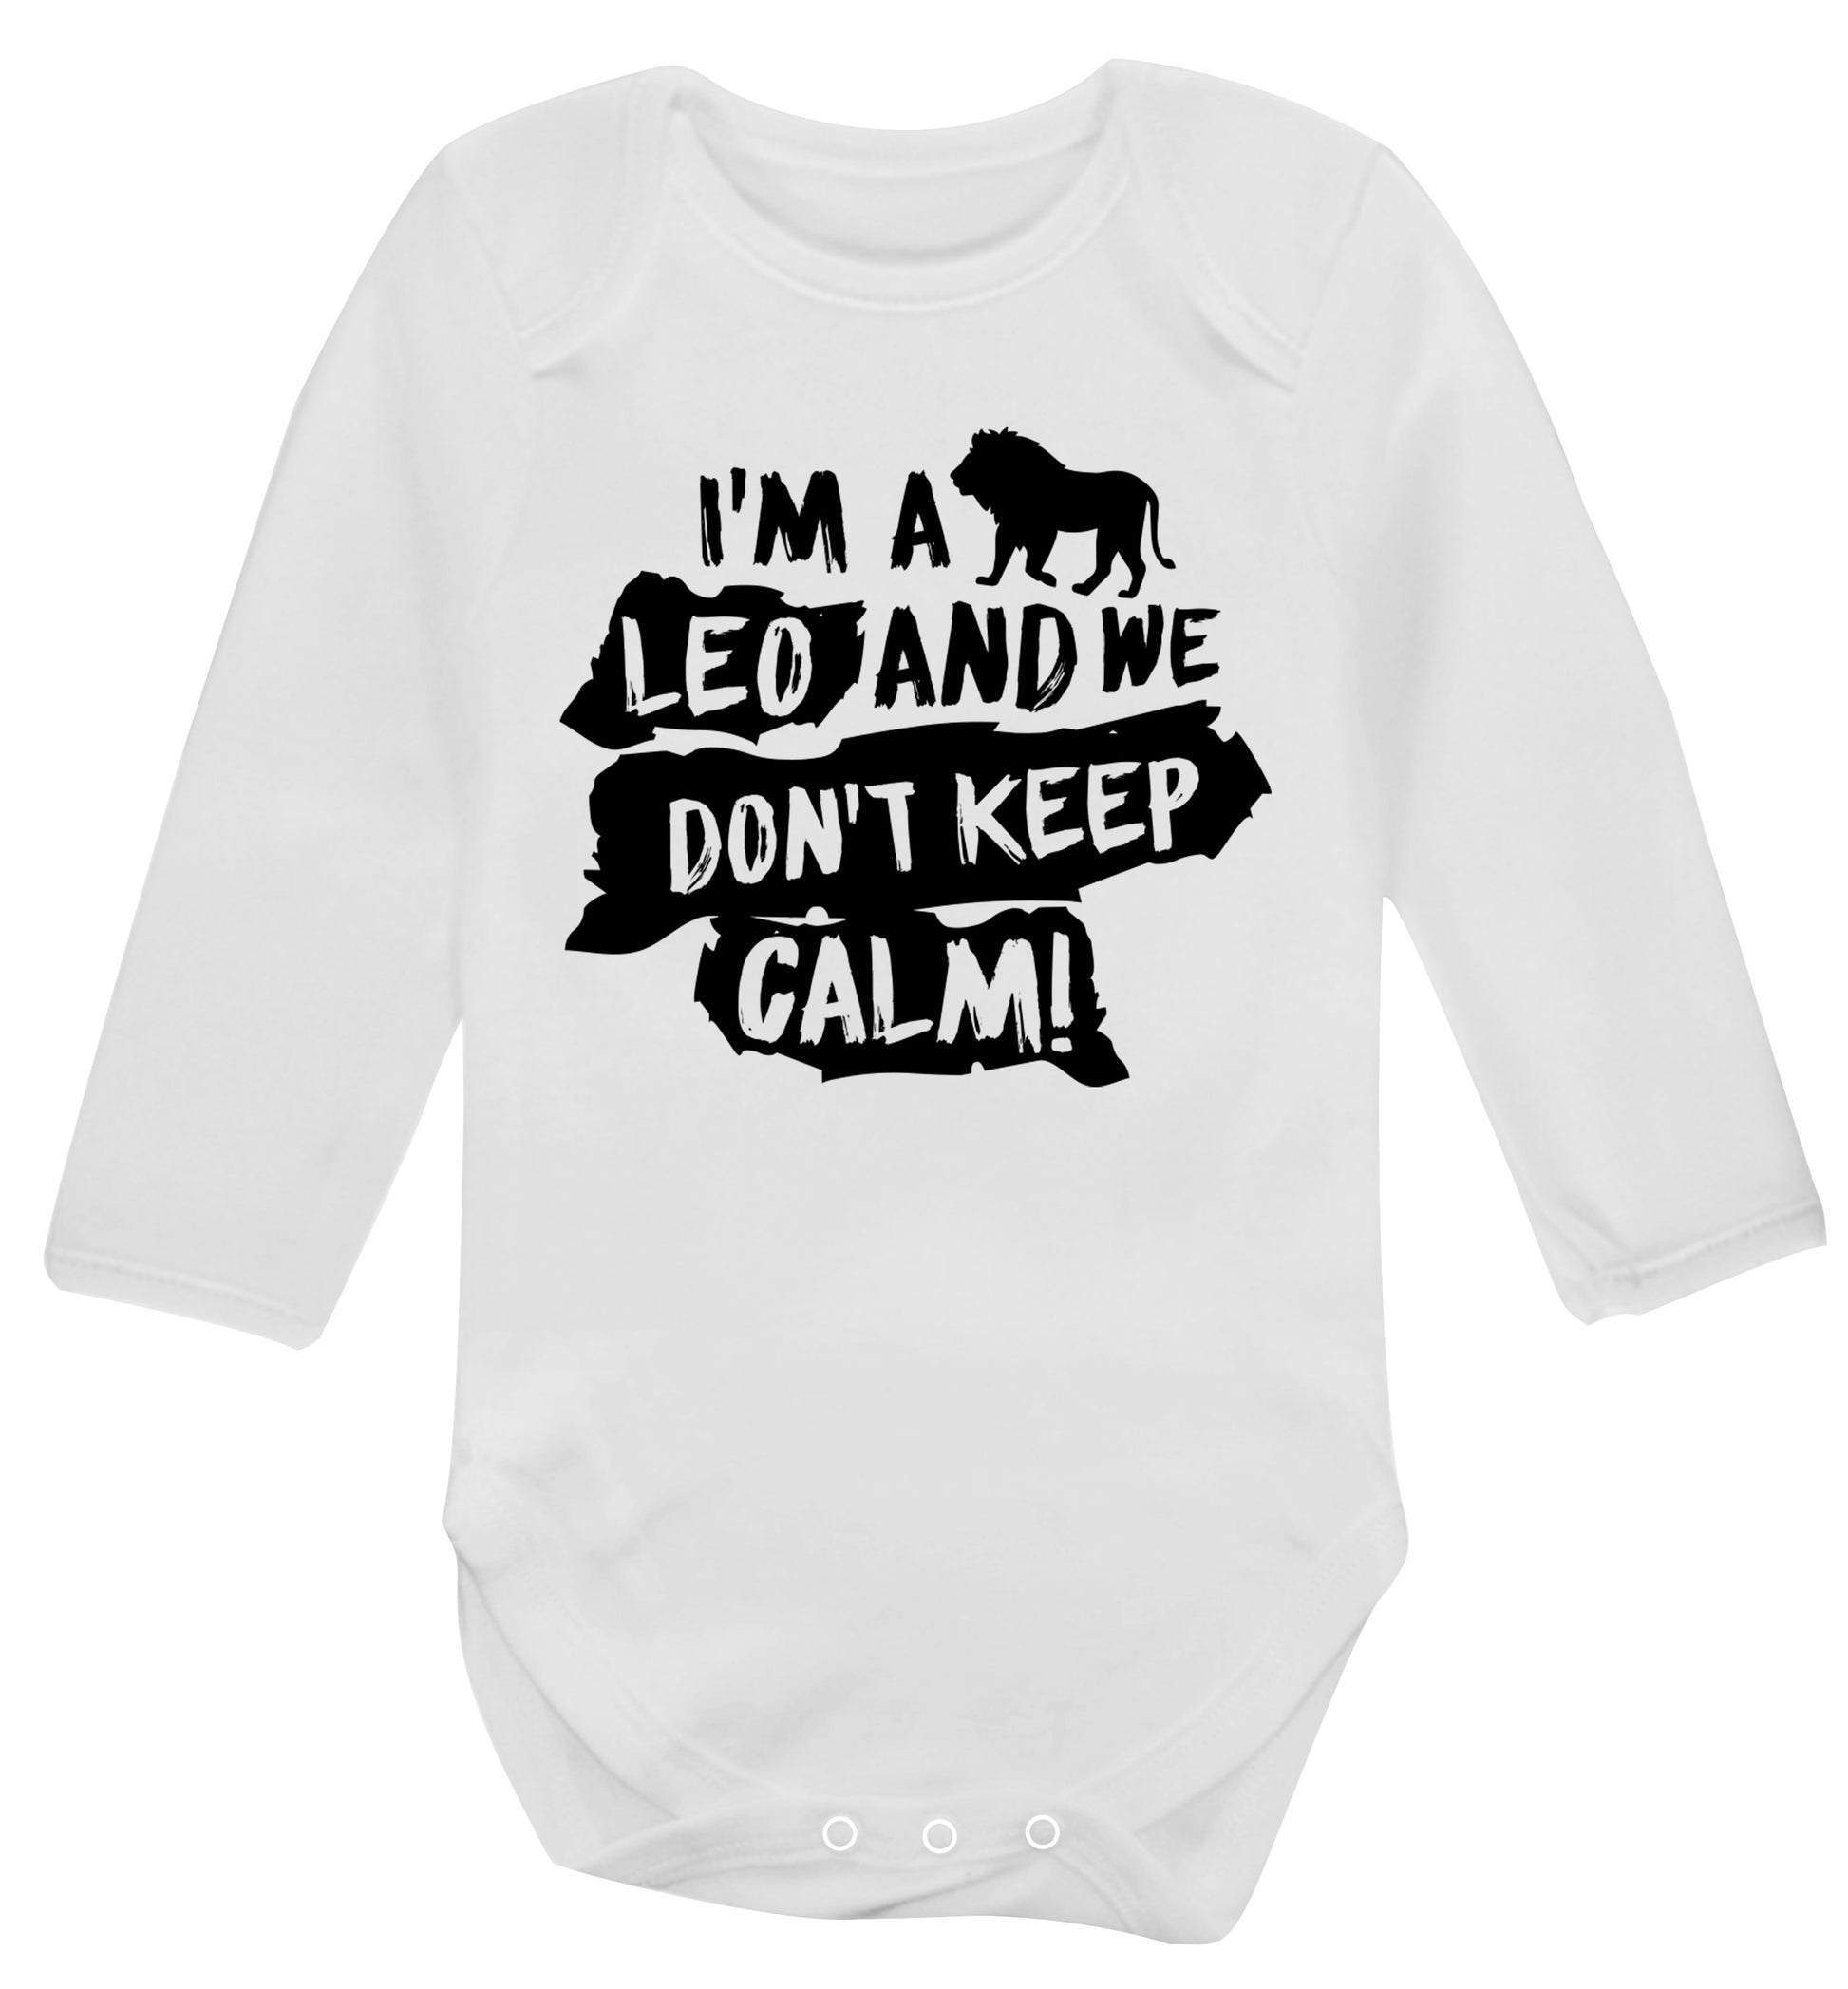 I'm a leo and we don't keep calm! Baby Vest long sleeved white 6-12 months